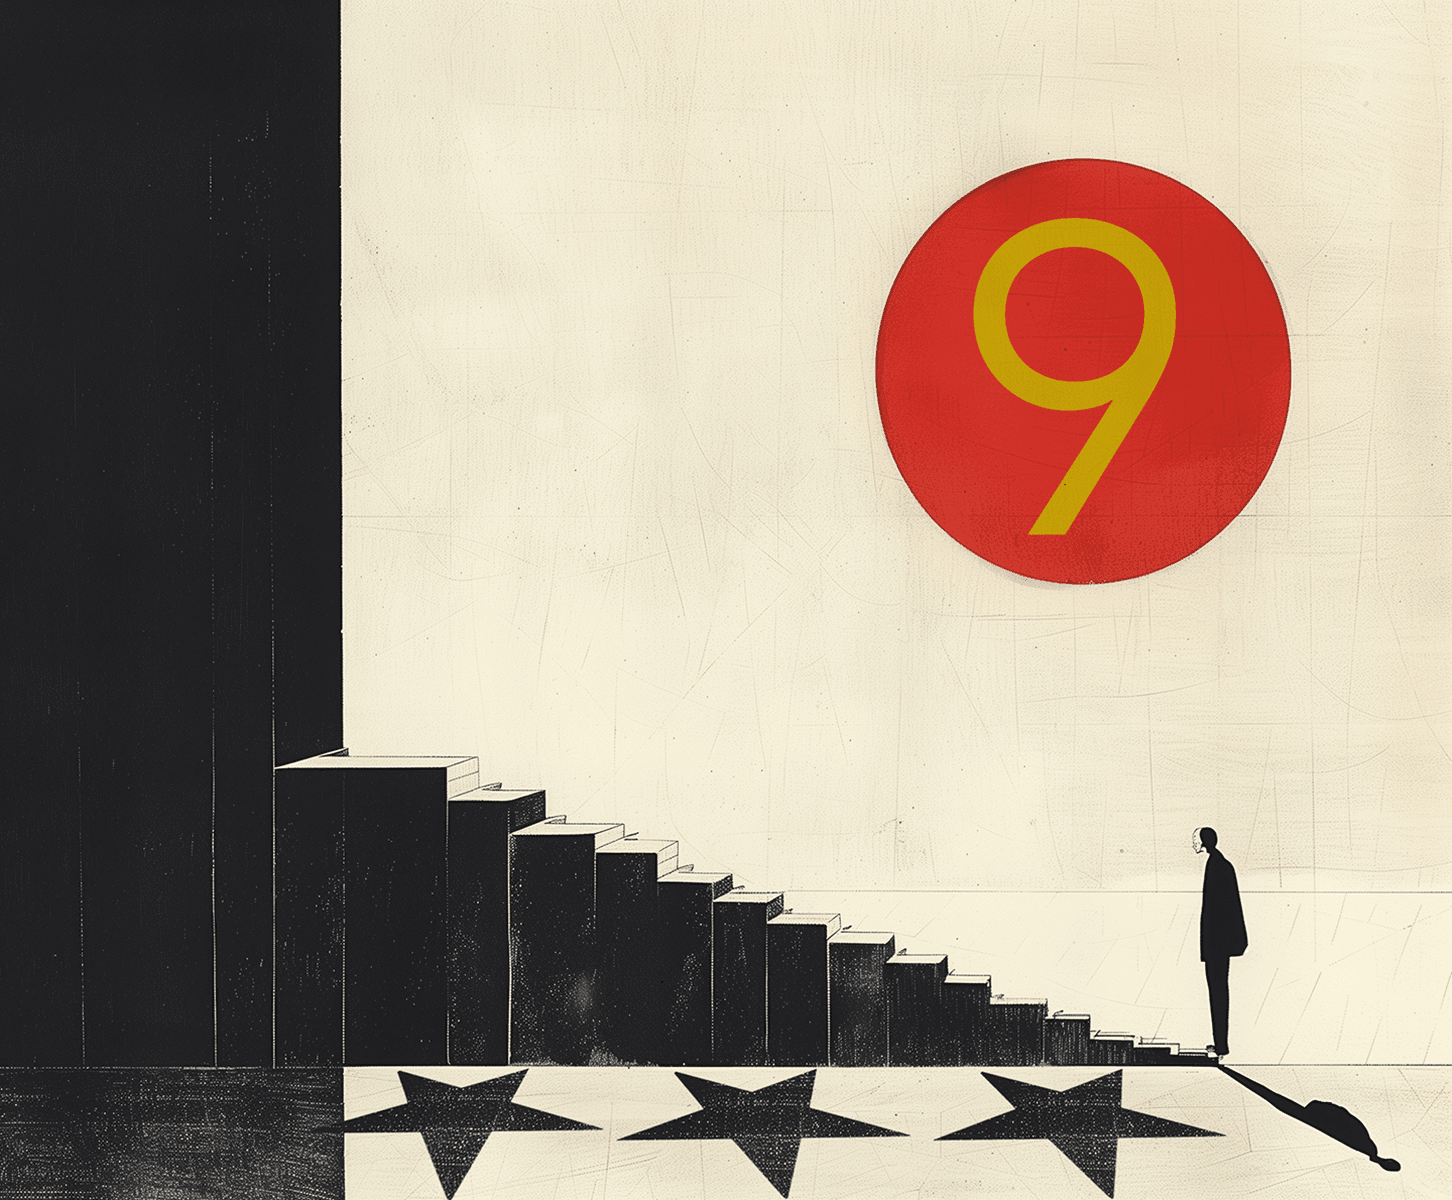 A man stands at the bottom of some stairs with stars labeled underneath them. A large circled nine is above him